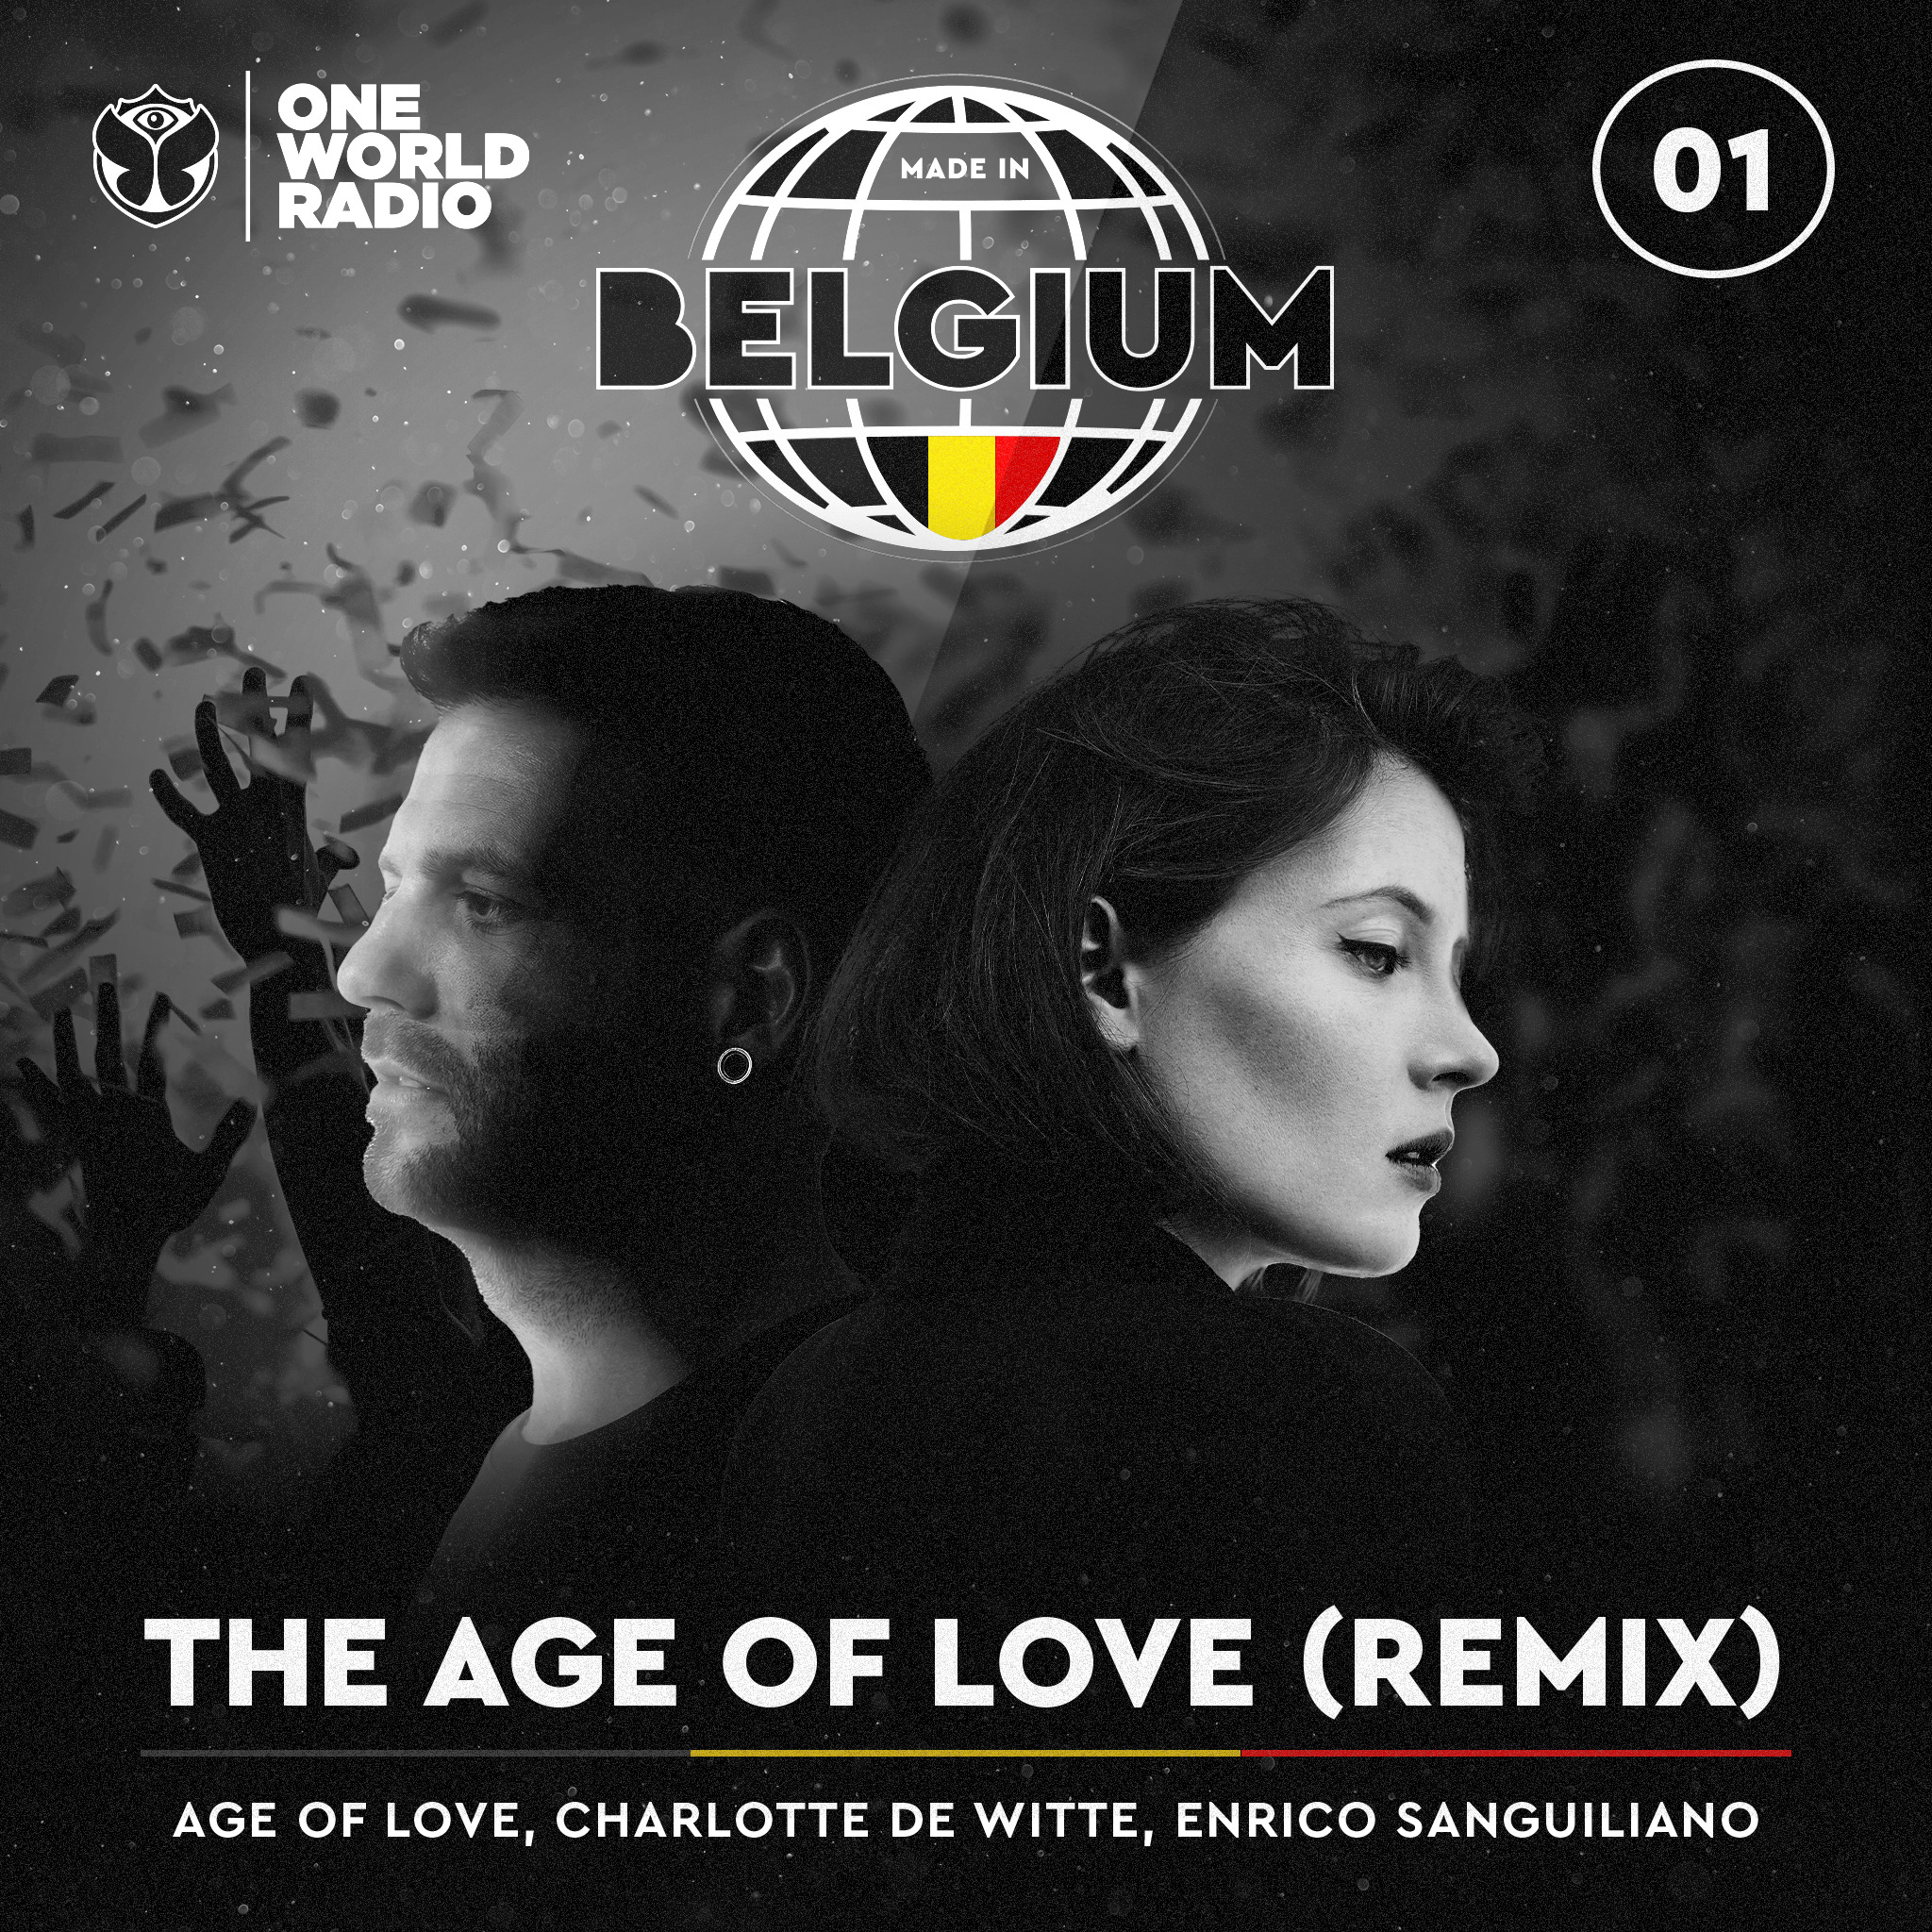 Charlotte de Witte's and Enrico Sangiuliano's remix of 'Age Of Love'  becomes the number 1 in The Made in Belgium Top 100